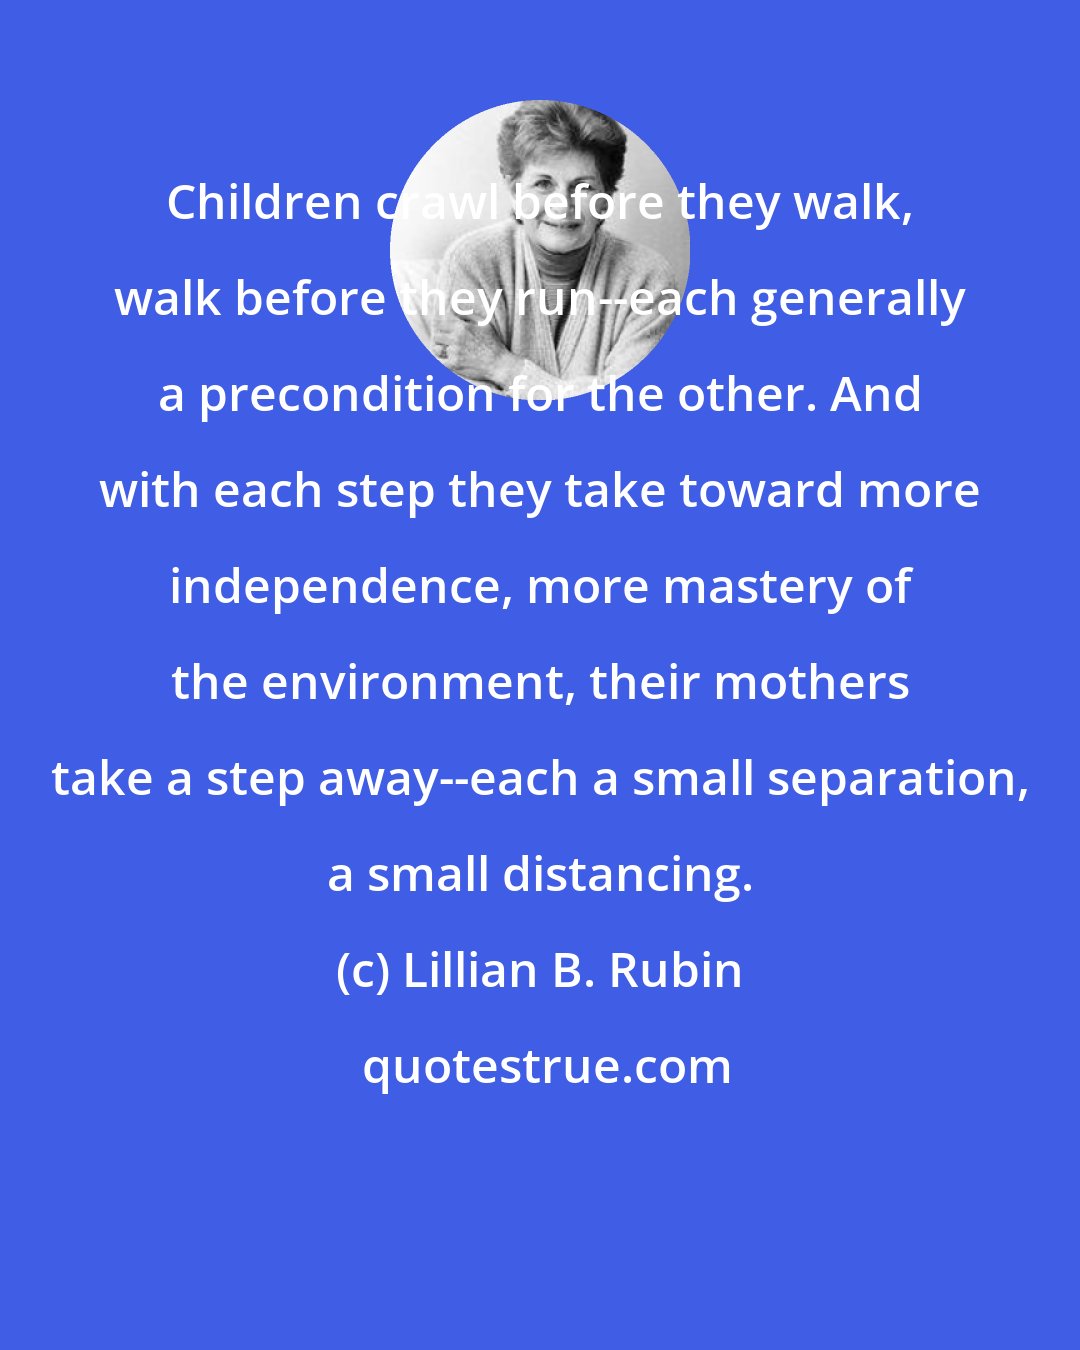 Lillian B. Rubin: Children crawl before they walk, walk before they run--each generally a precondition for the other. And with each step they take toward more independence, more mastery of the environment, their mothers take a step away--each a small separation, a small distancing.